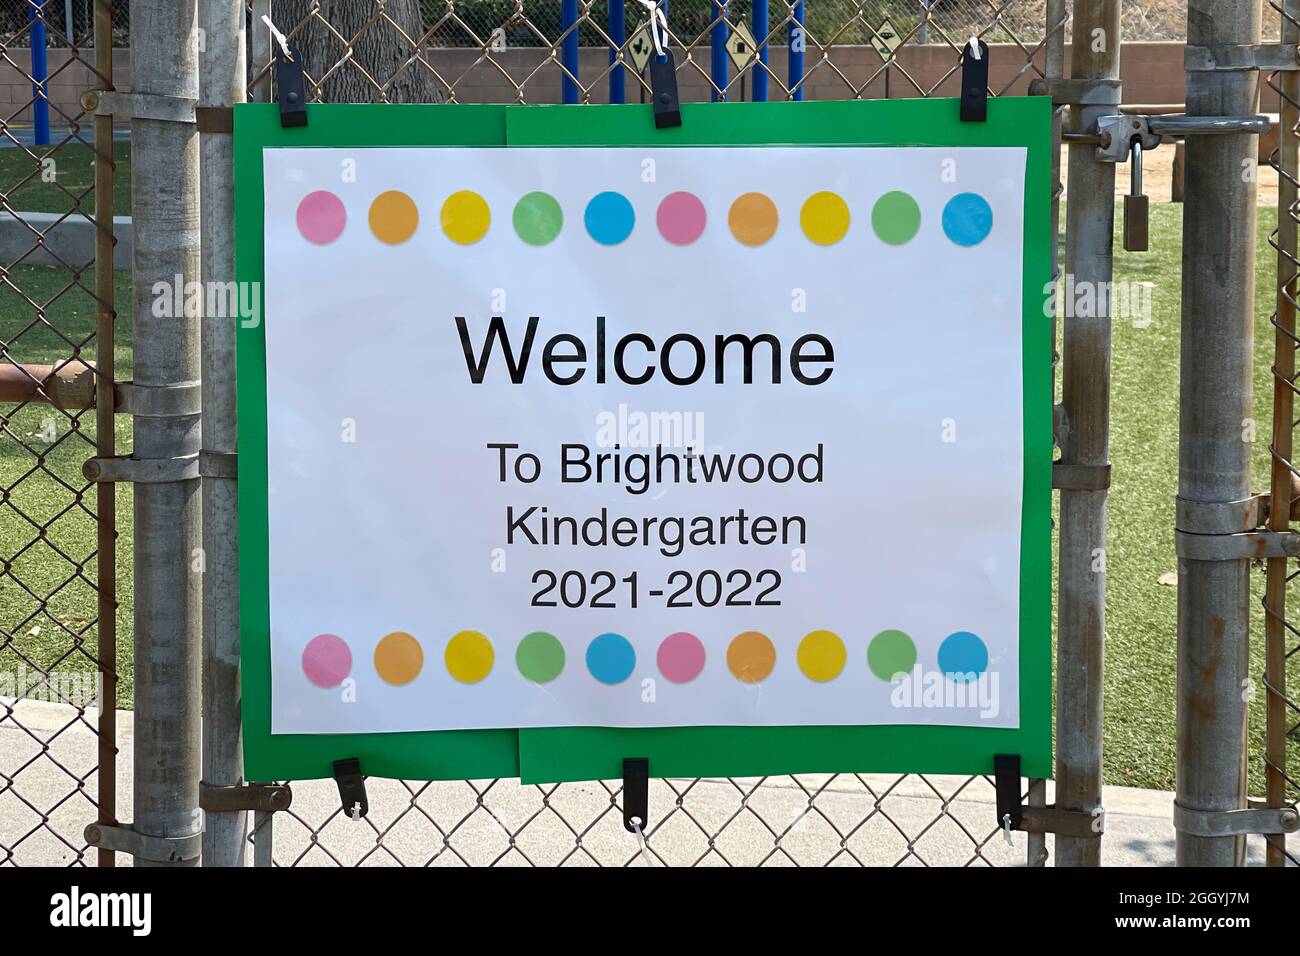 A Kindergarten welcome sign at Brightwood School, Tuesday, Aug. 17, 2021, in Monterey Park, Calif. Stock Photo